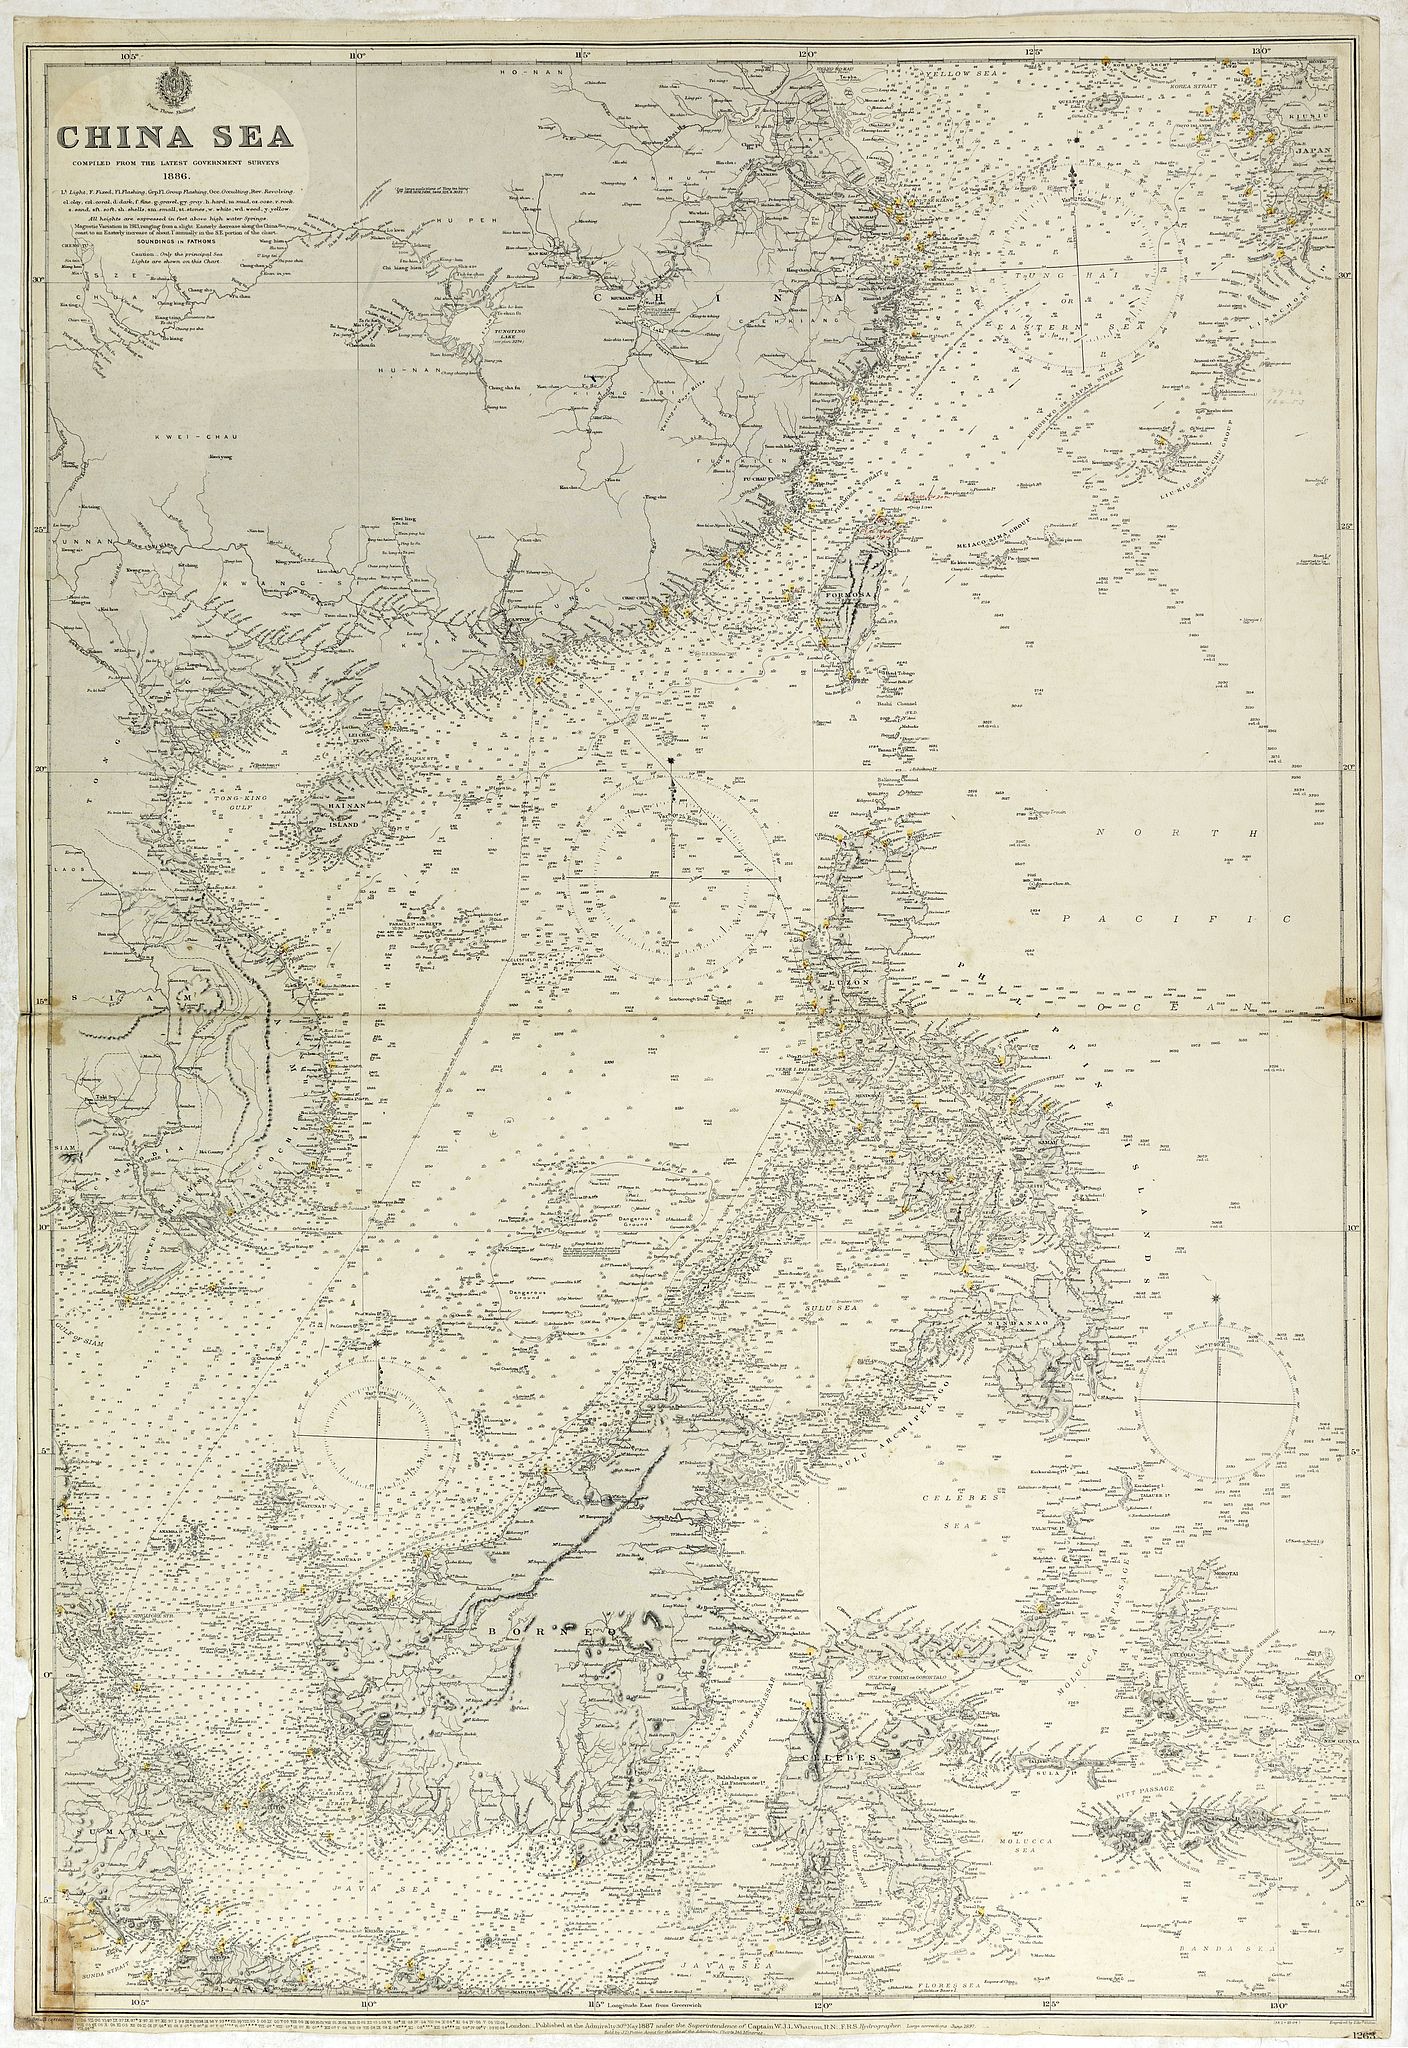 China sea compiled from the latest government surveys 1886